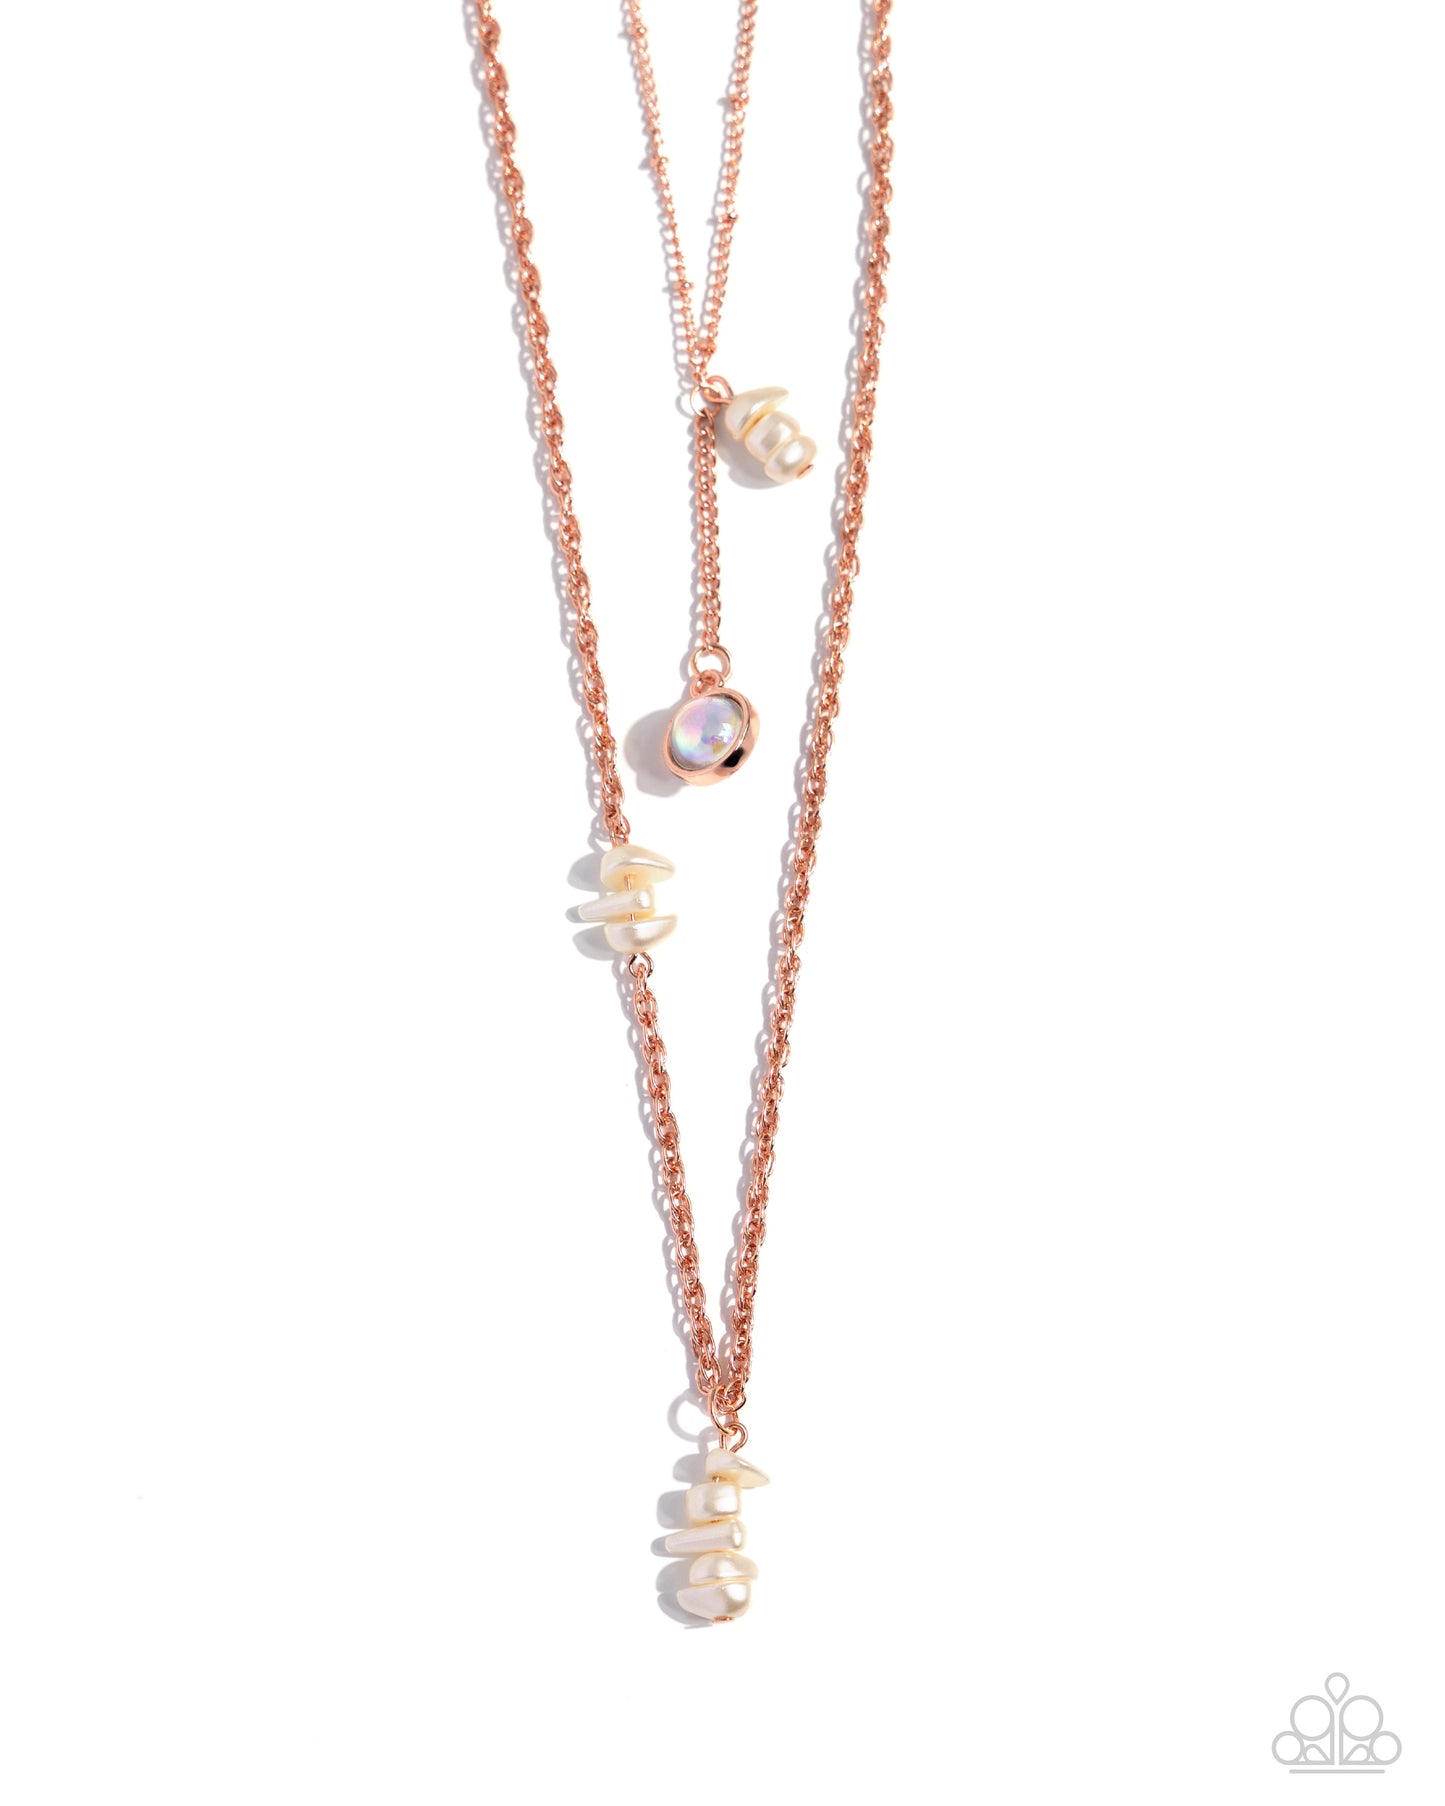 Leisurely Layered - copper - Paparazzi necklace